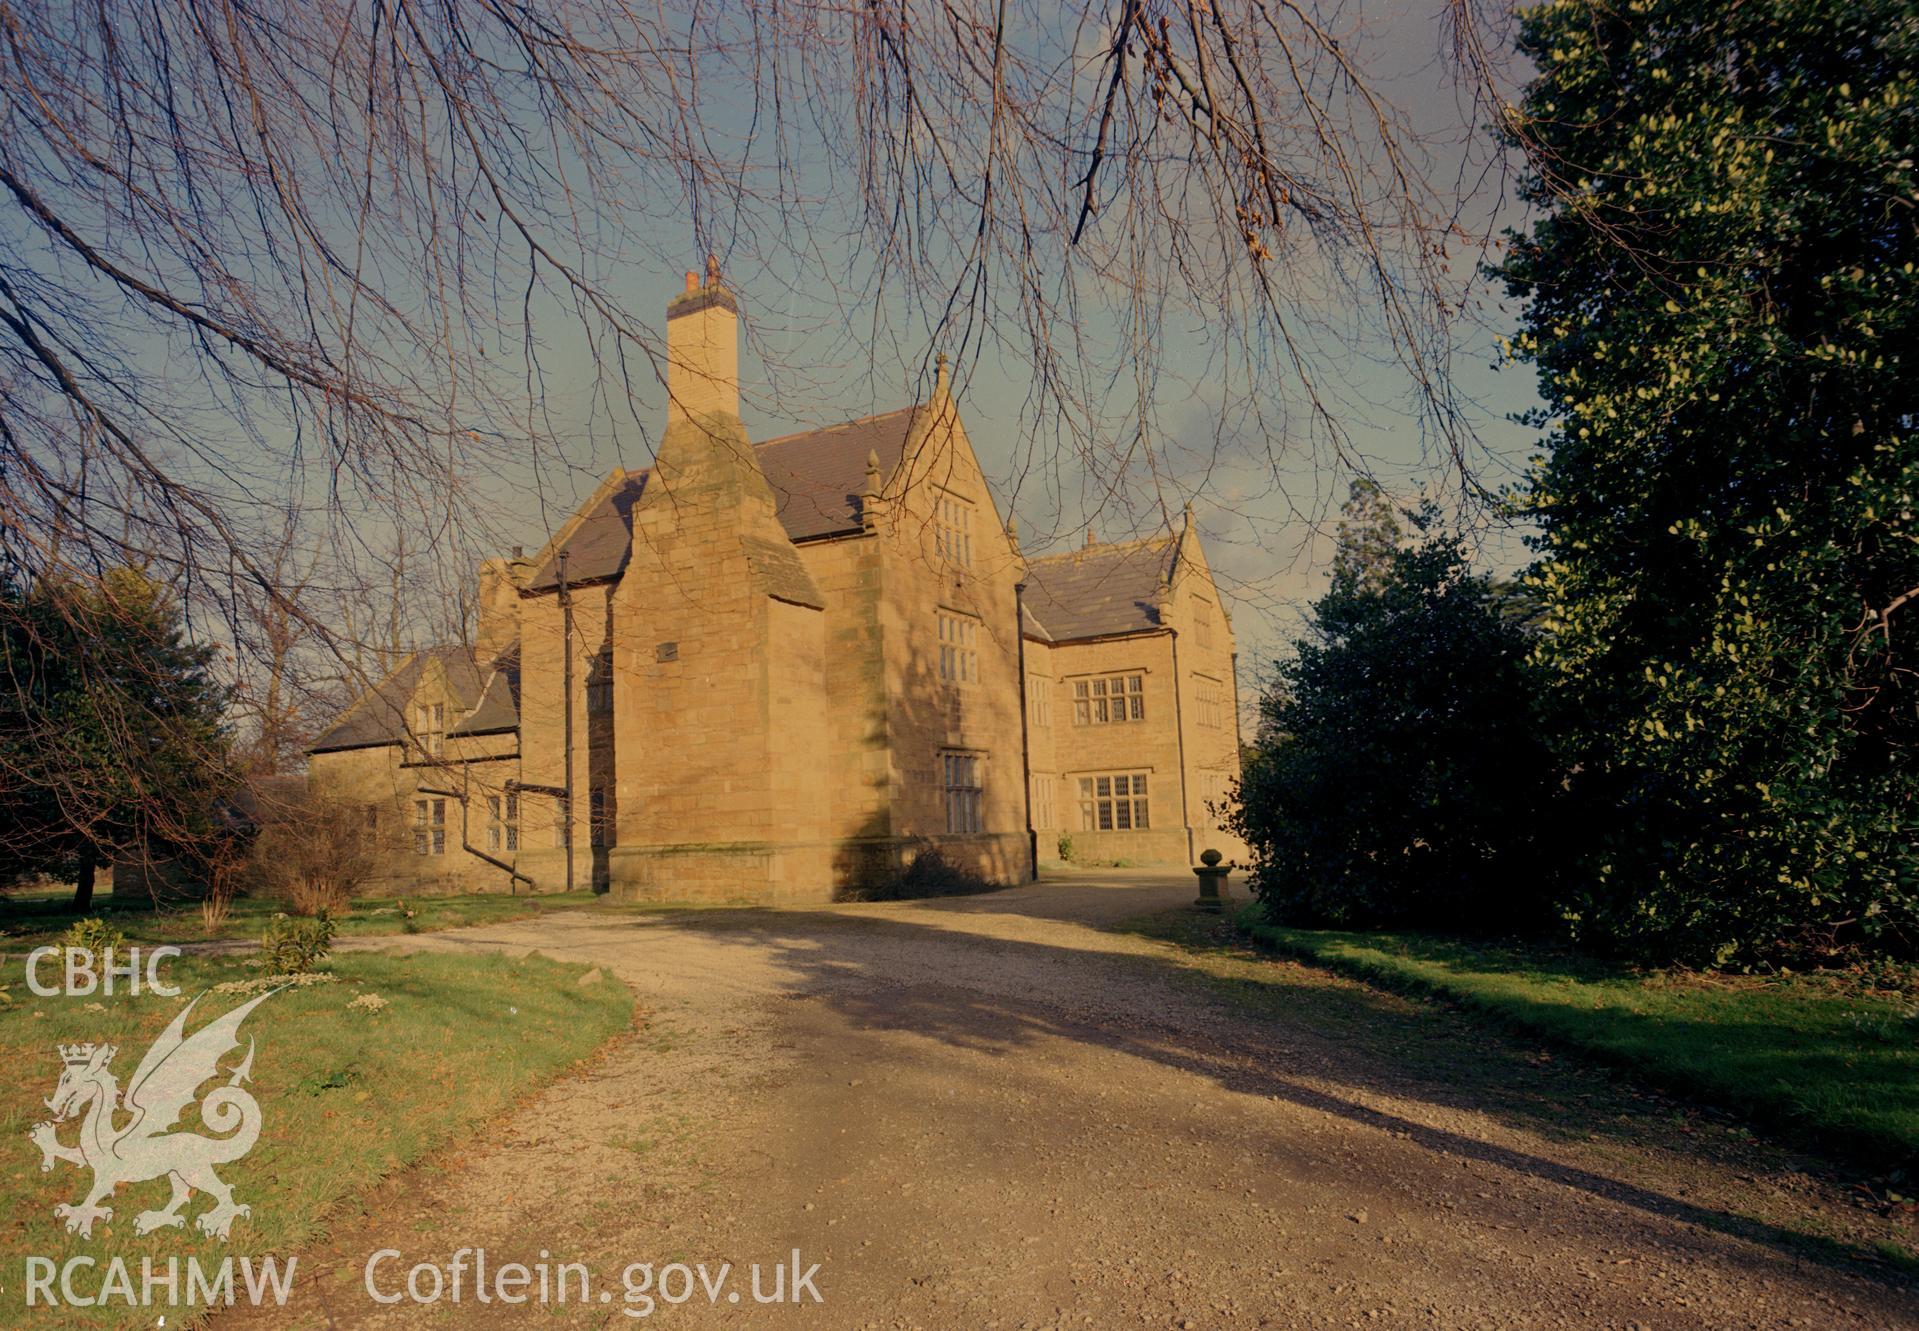 Digital copy of a colour negative showing an exterior view of Pentre Halkyn taken by RCAHMW.